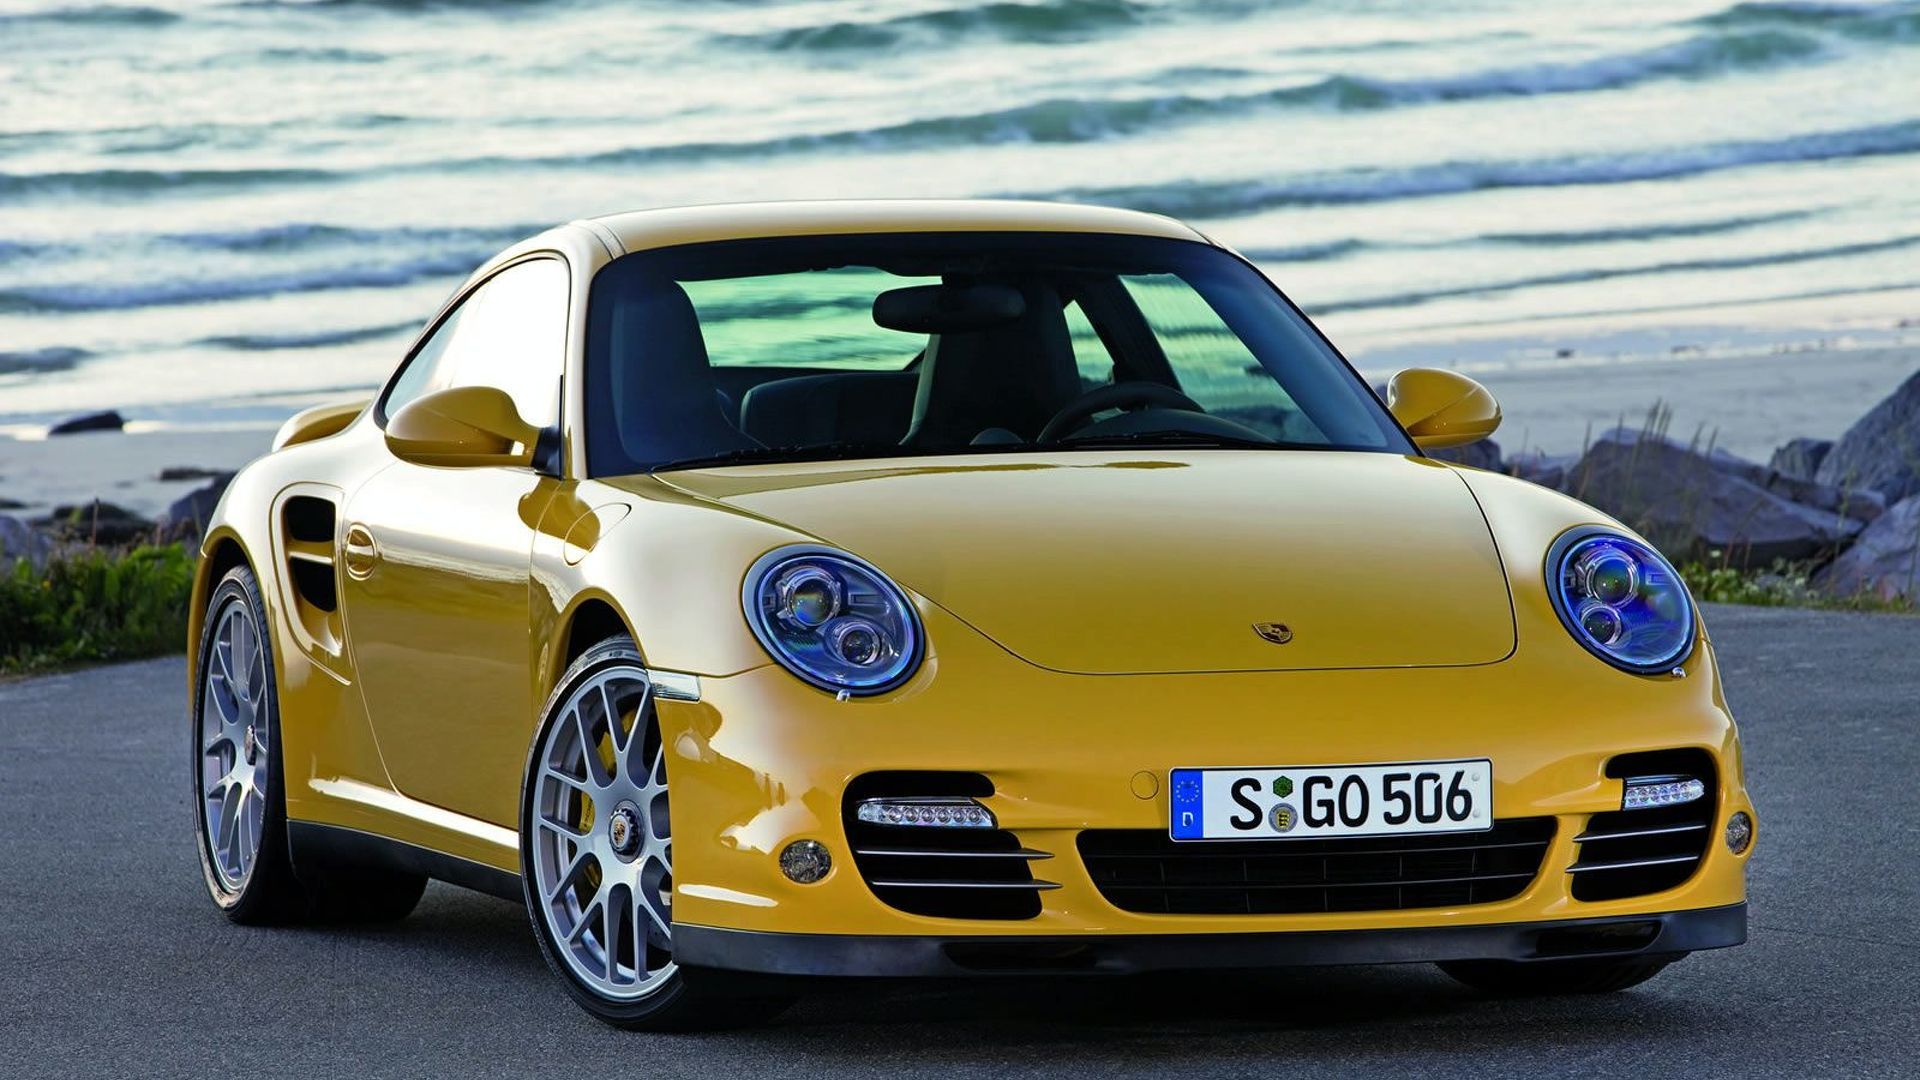 Porsche 997: The iconic sports car made for all ages.